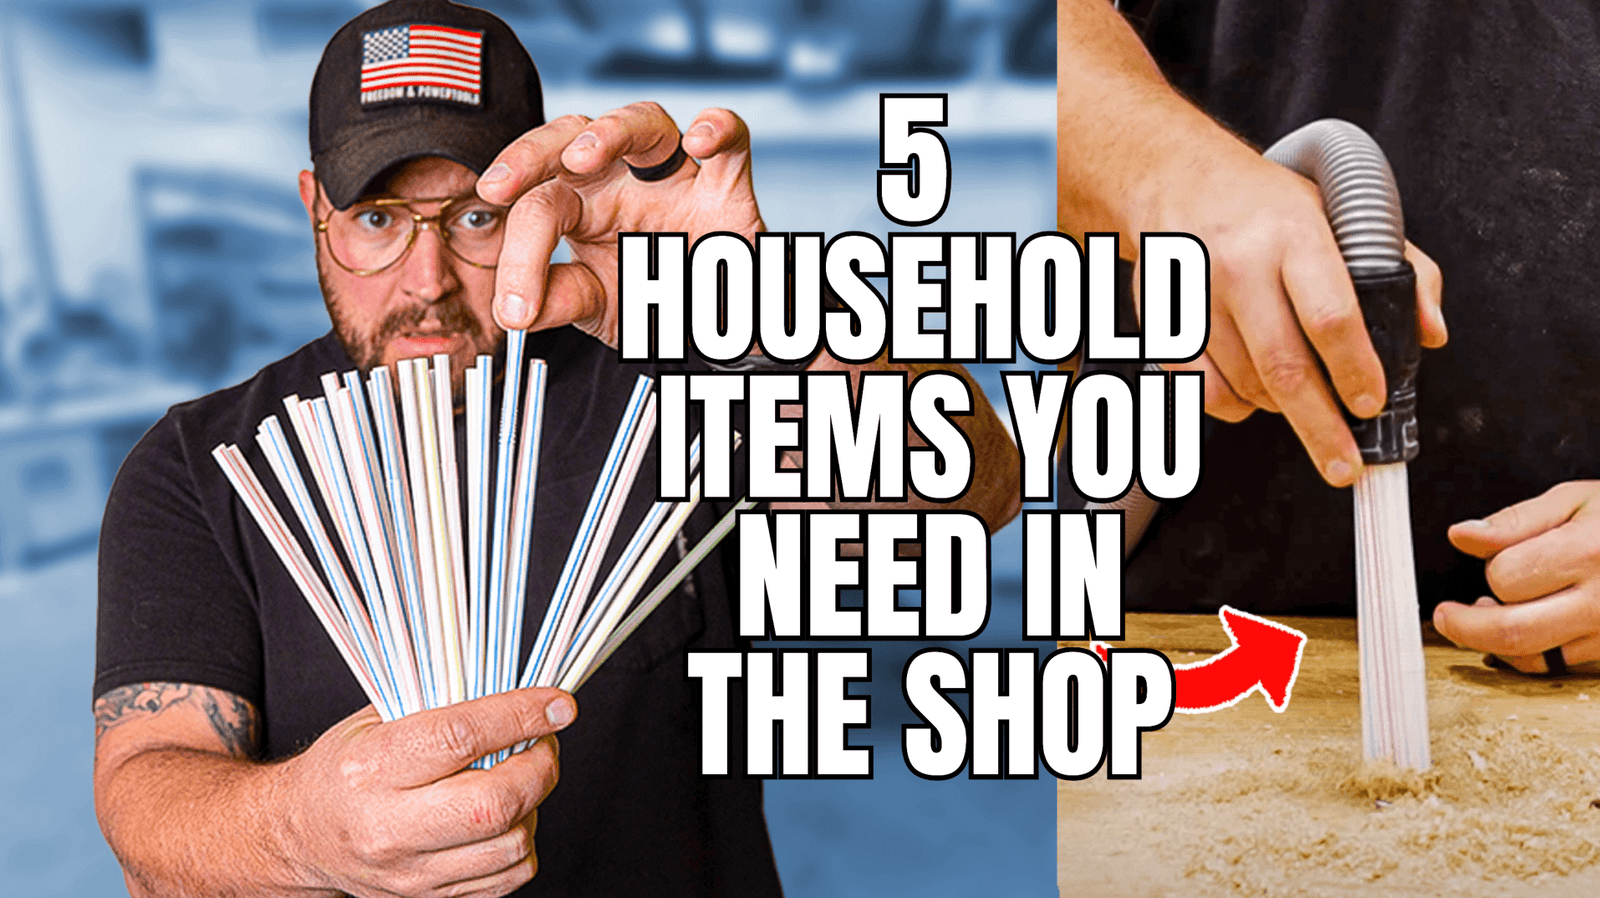 5 Household Items You Need in the Shop